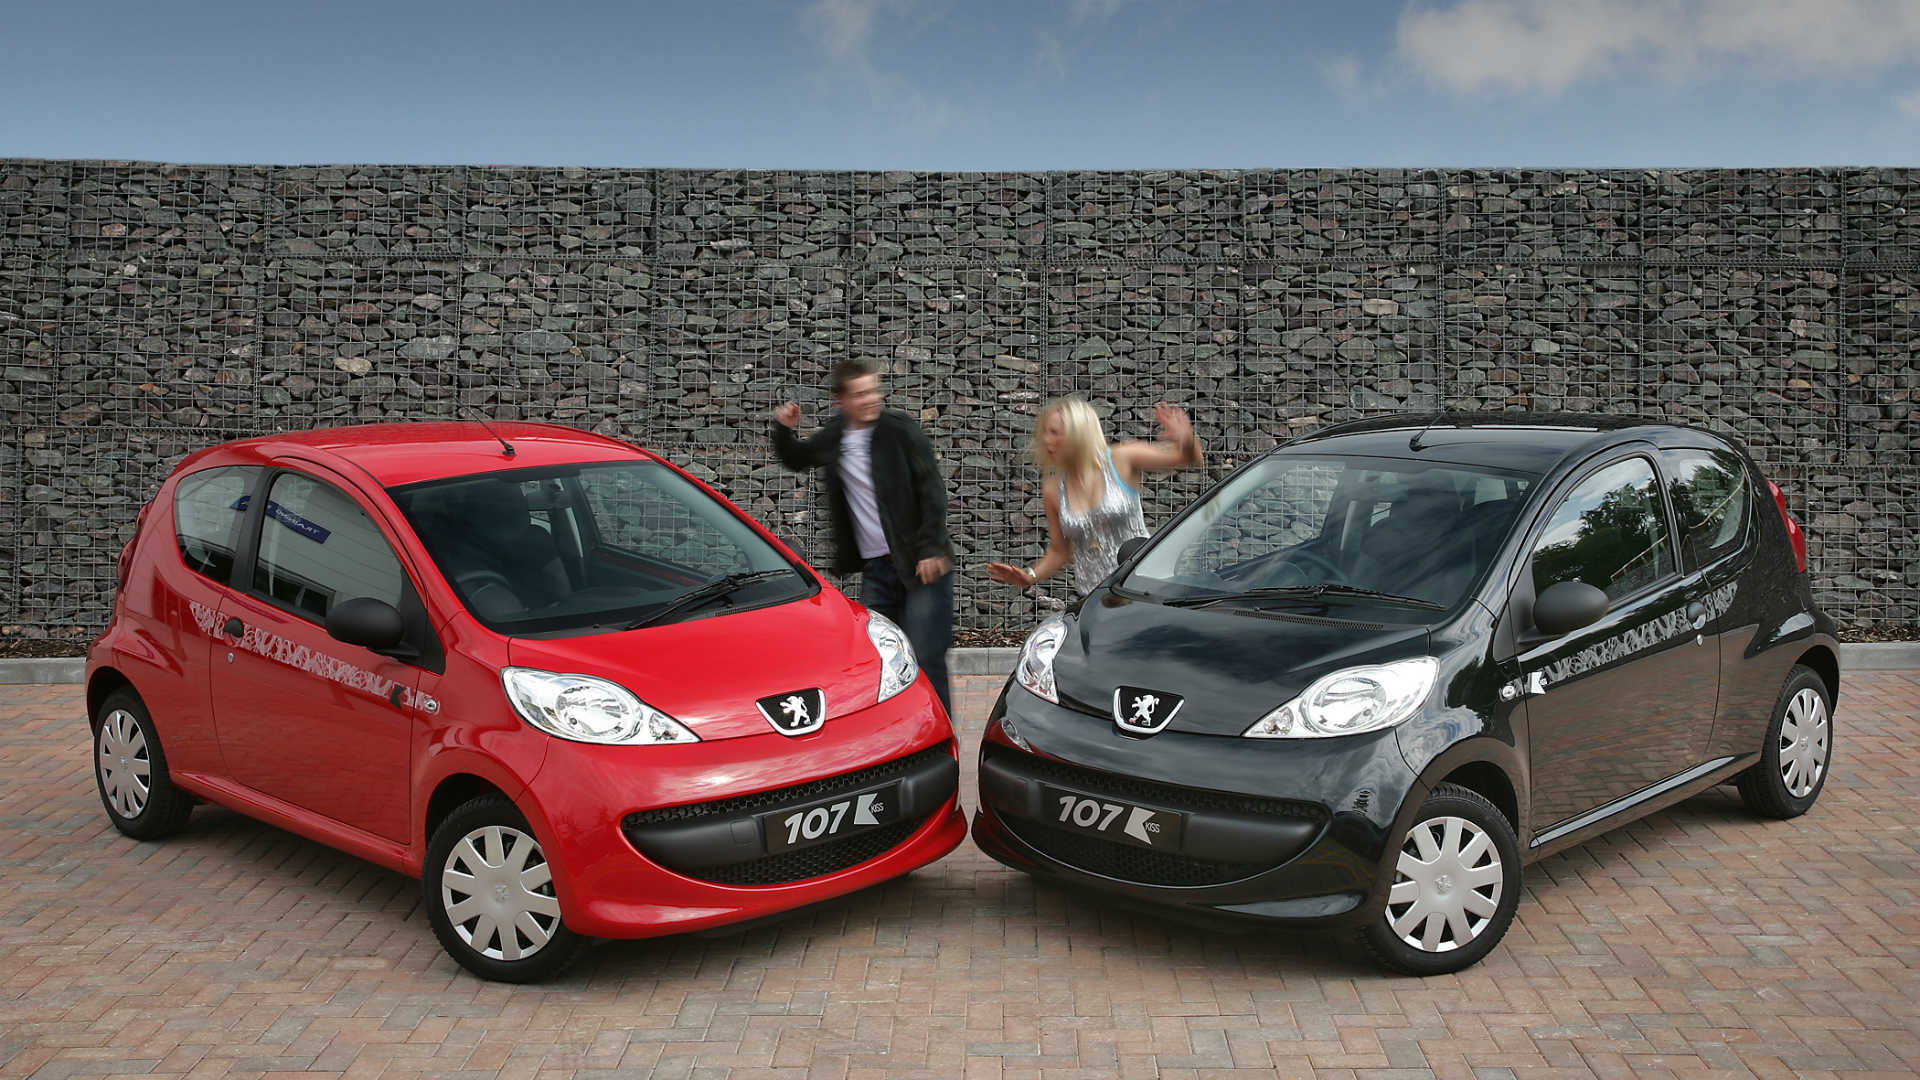 The 10 Cheapest Cars For 17 Year Olds To Insure Motoring with regard to dimensions 1920 X 1080